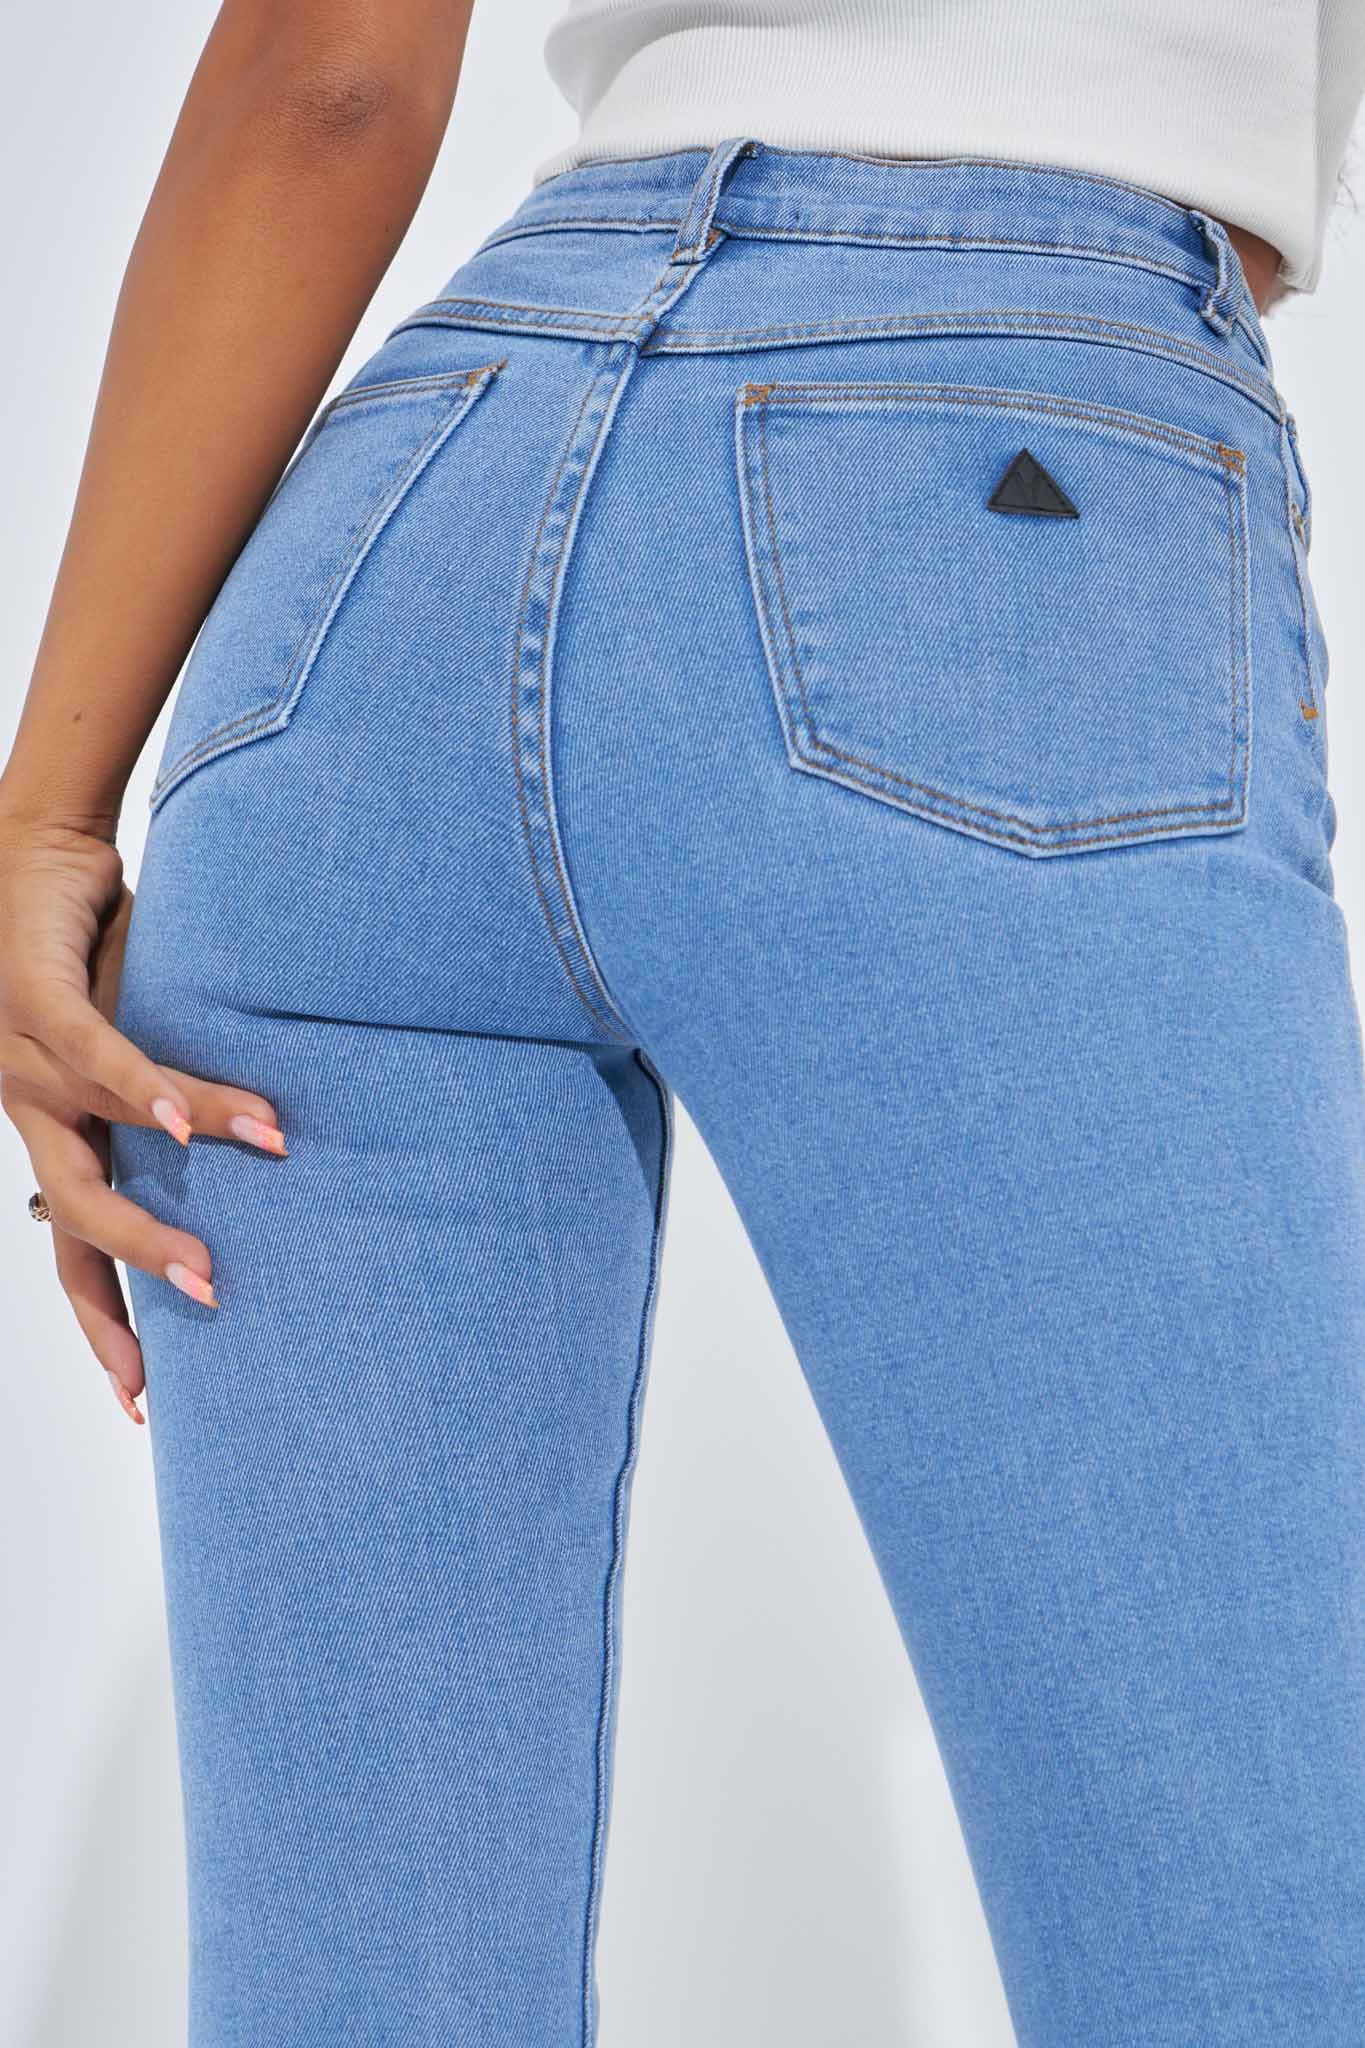 Abrand High Skinny Ankle Basher Jeans in La Blues